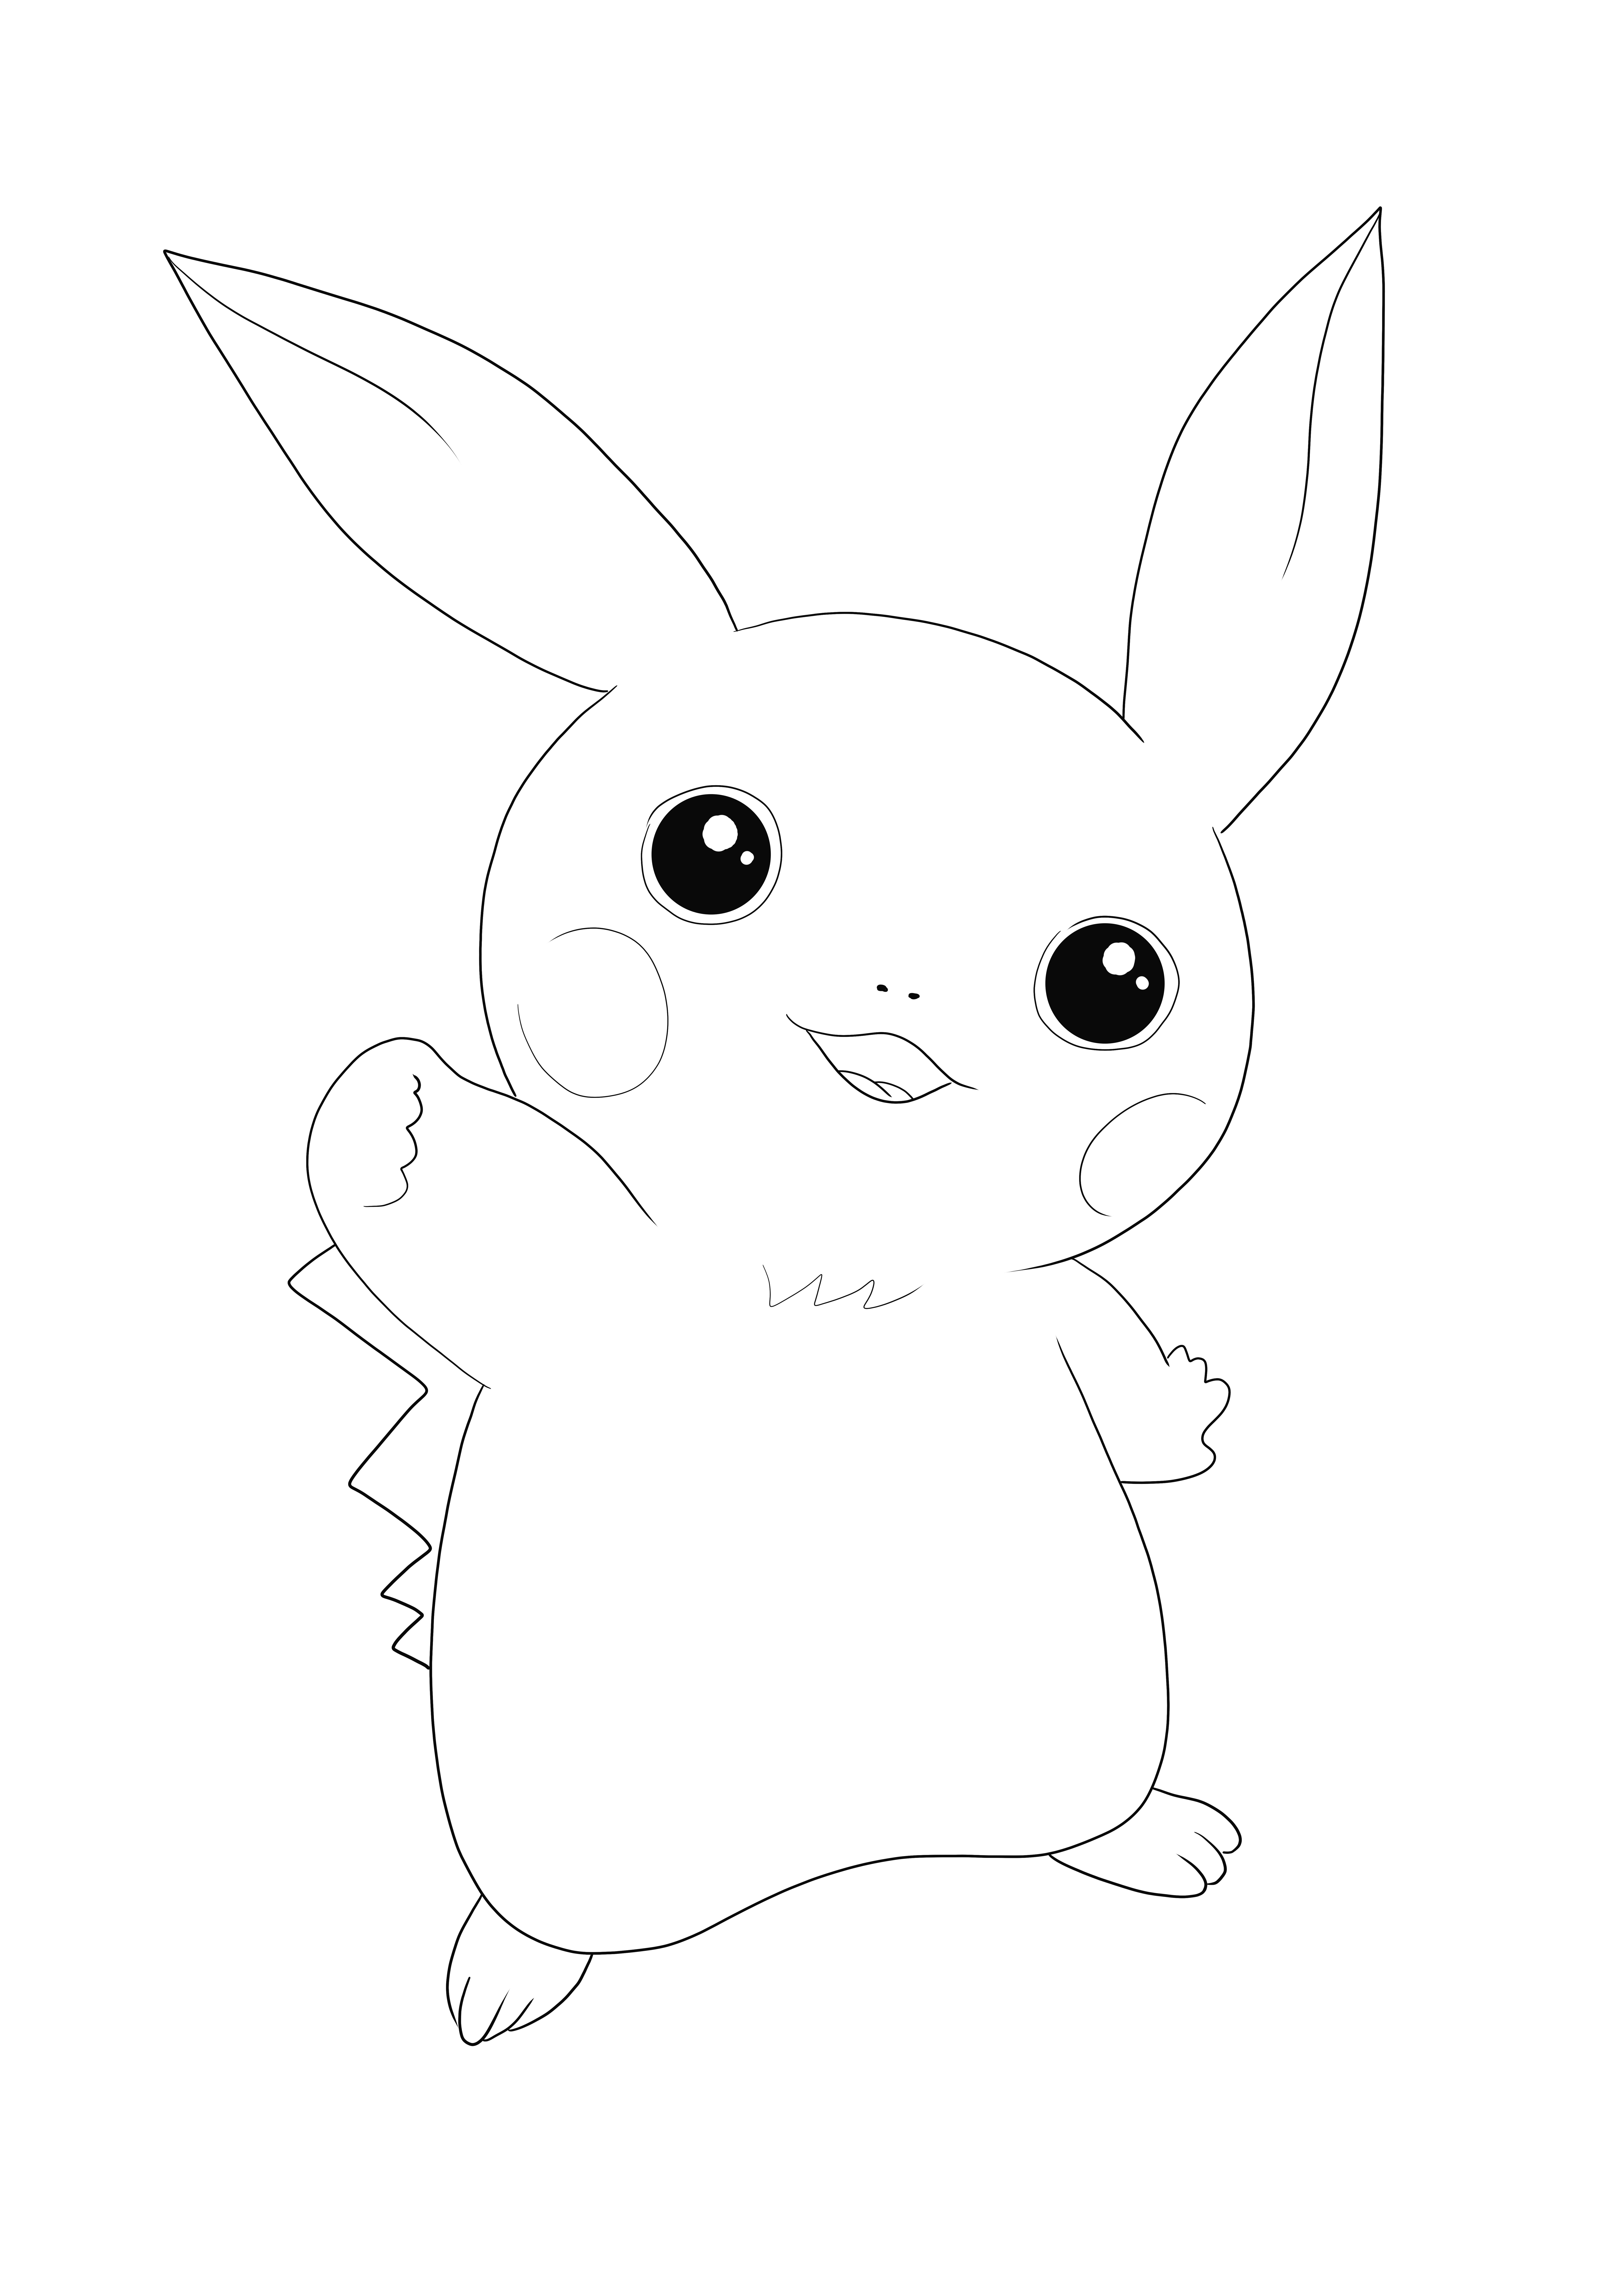 Here is our Pikachu coloring page, free to download or print